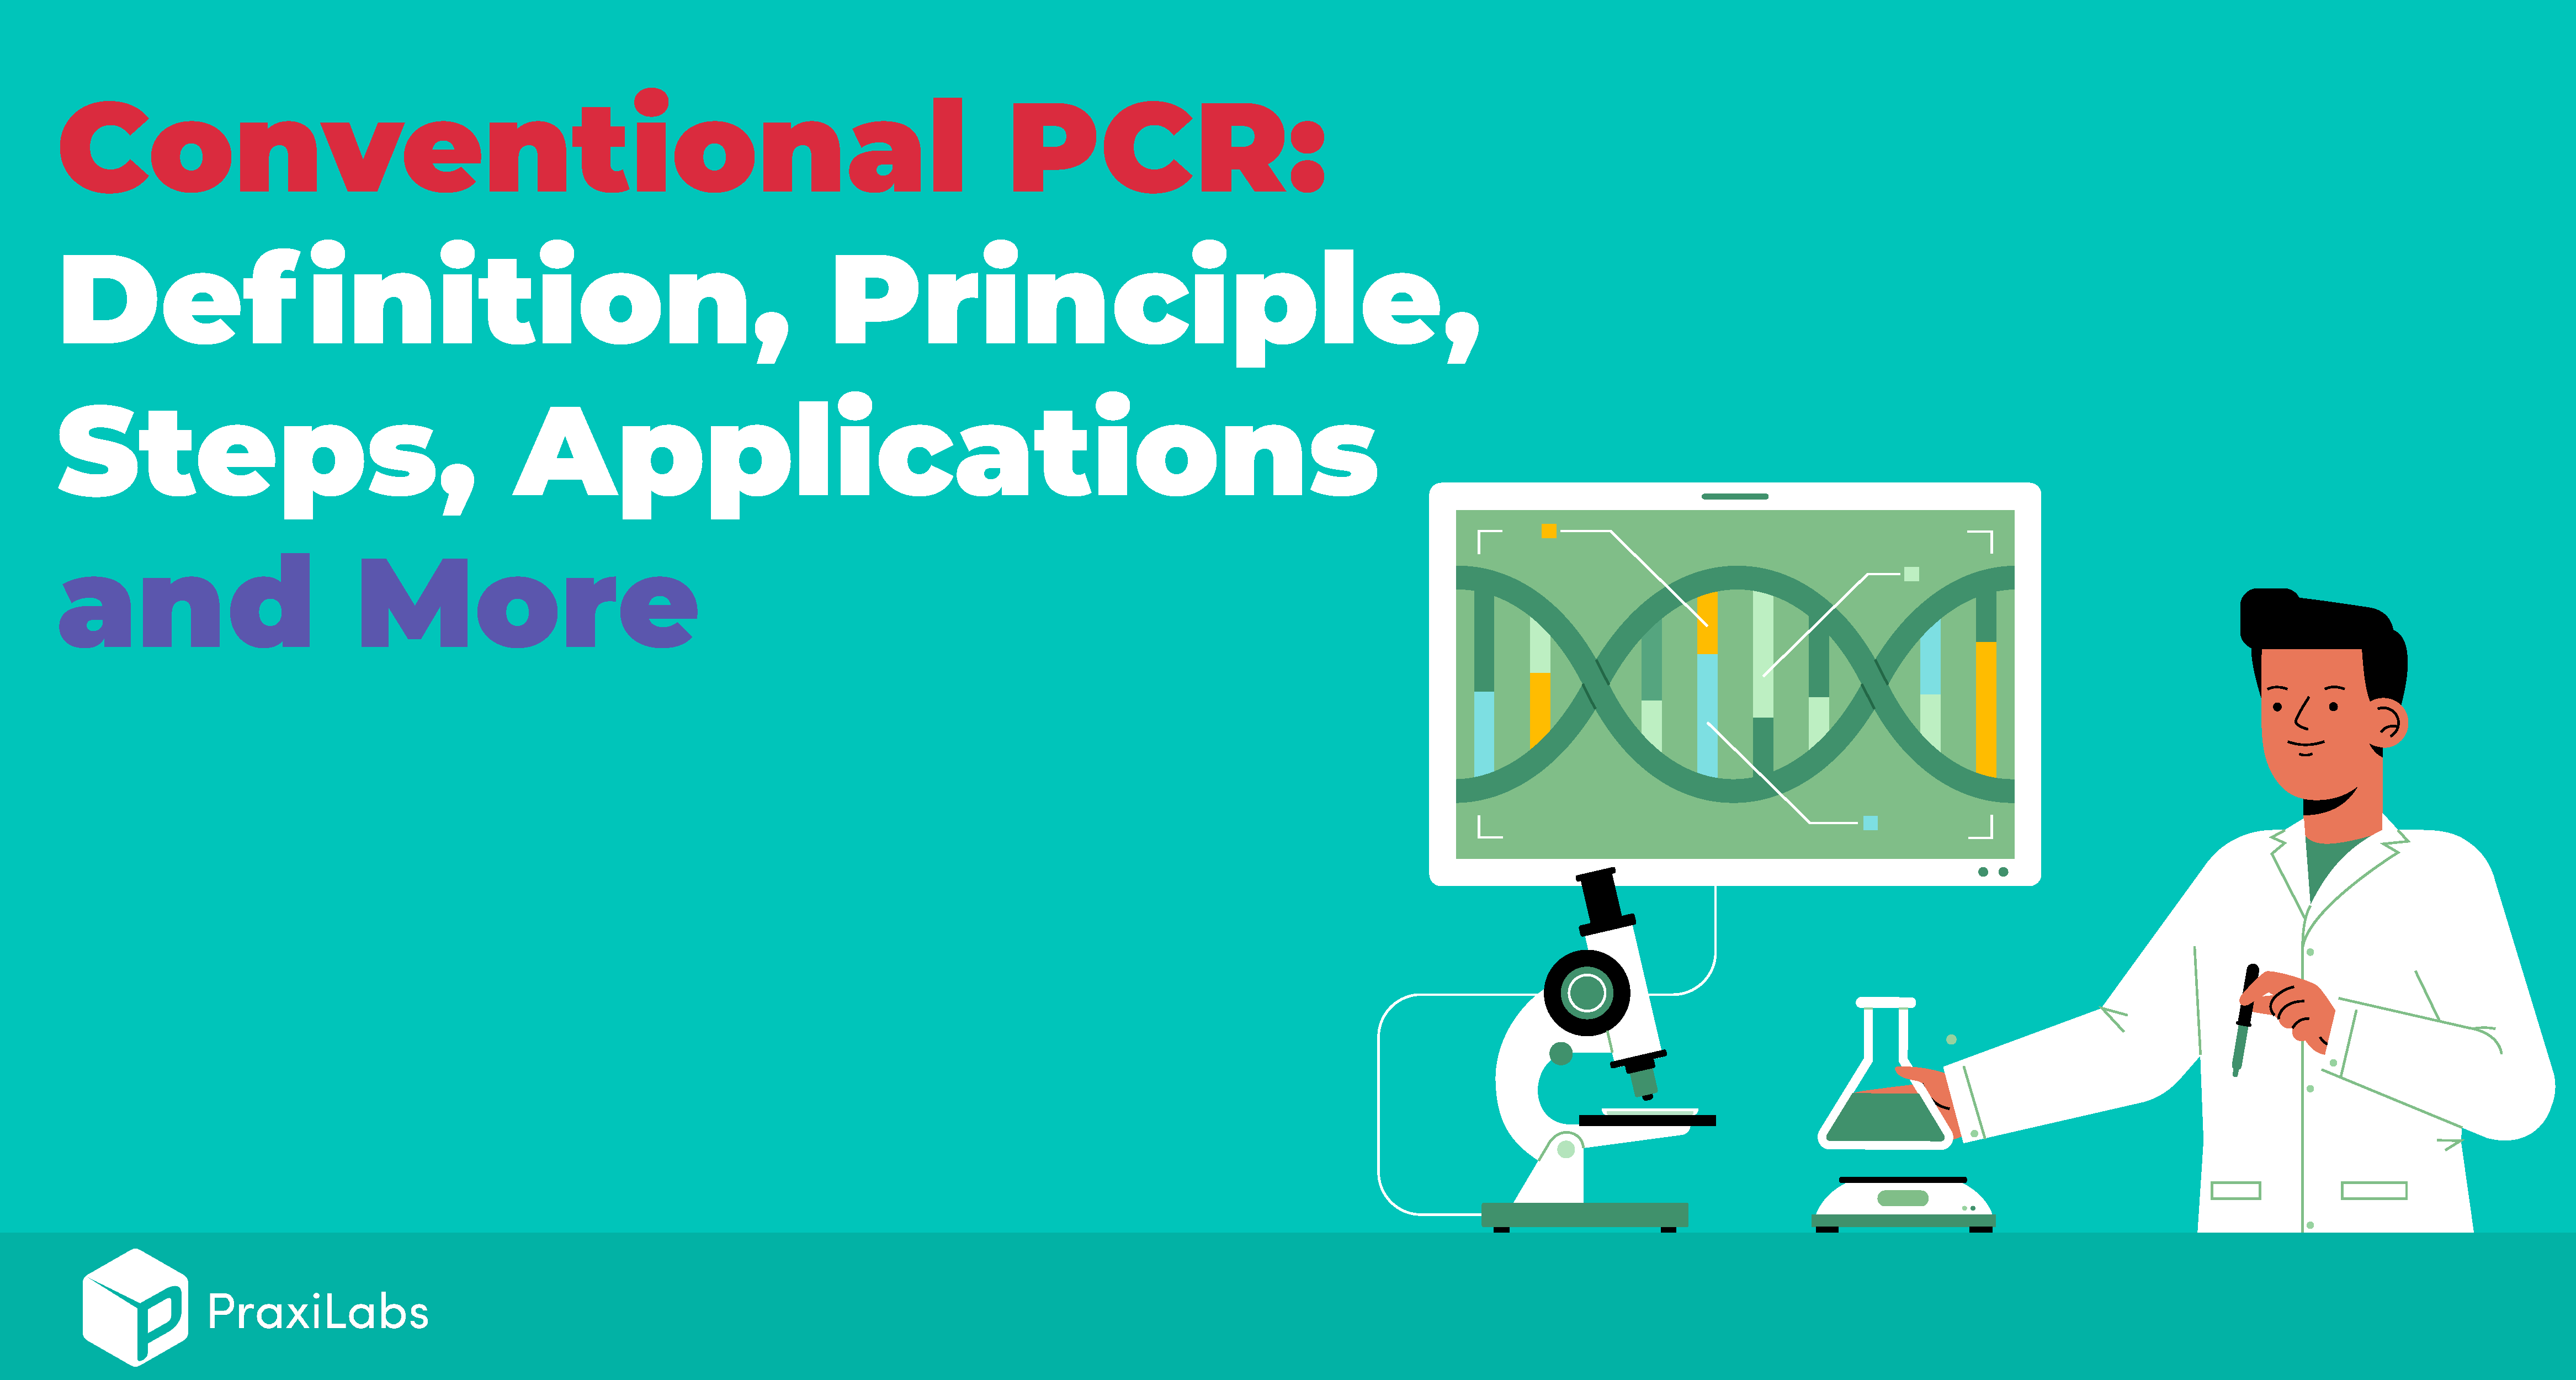 What Are The Three Basic Steps of Conventional PCR?